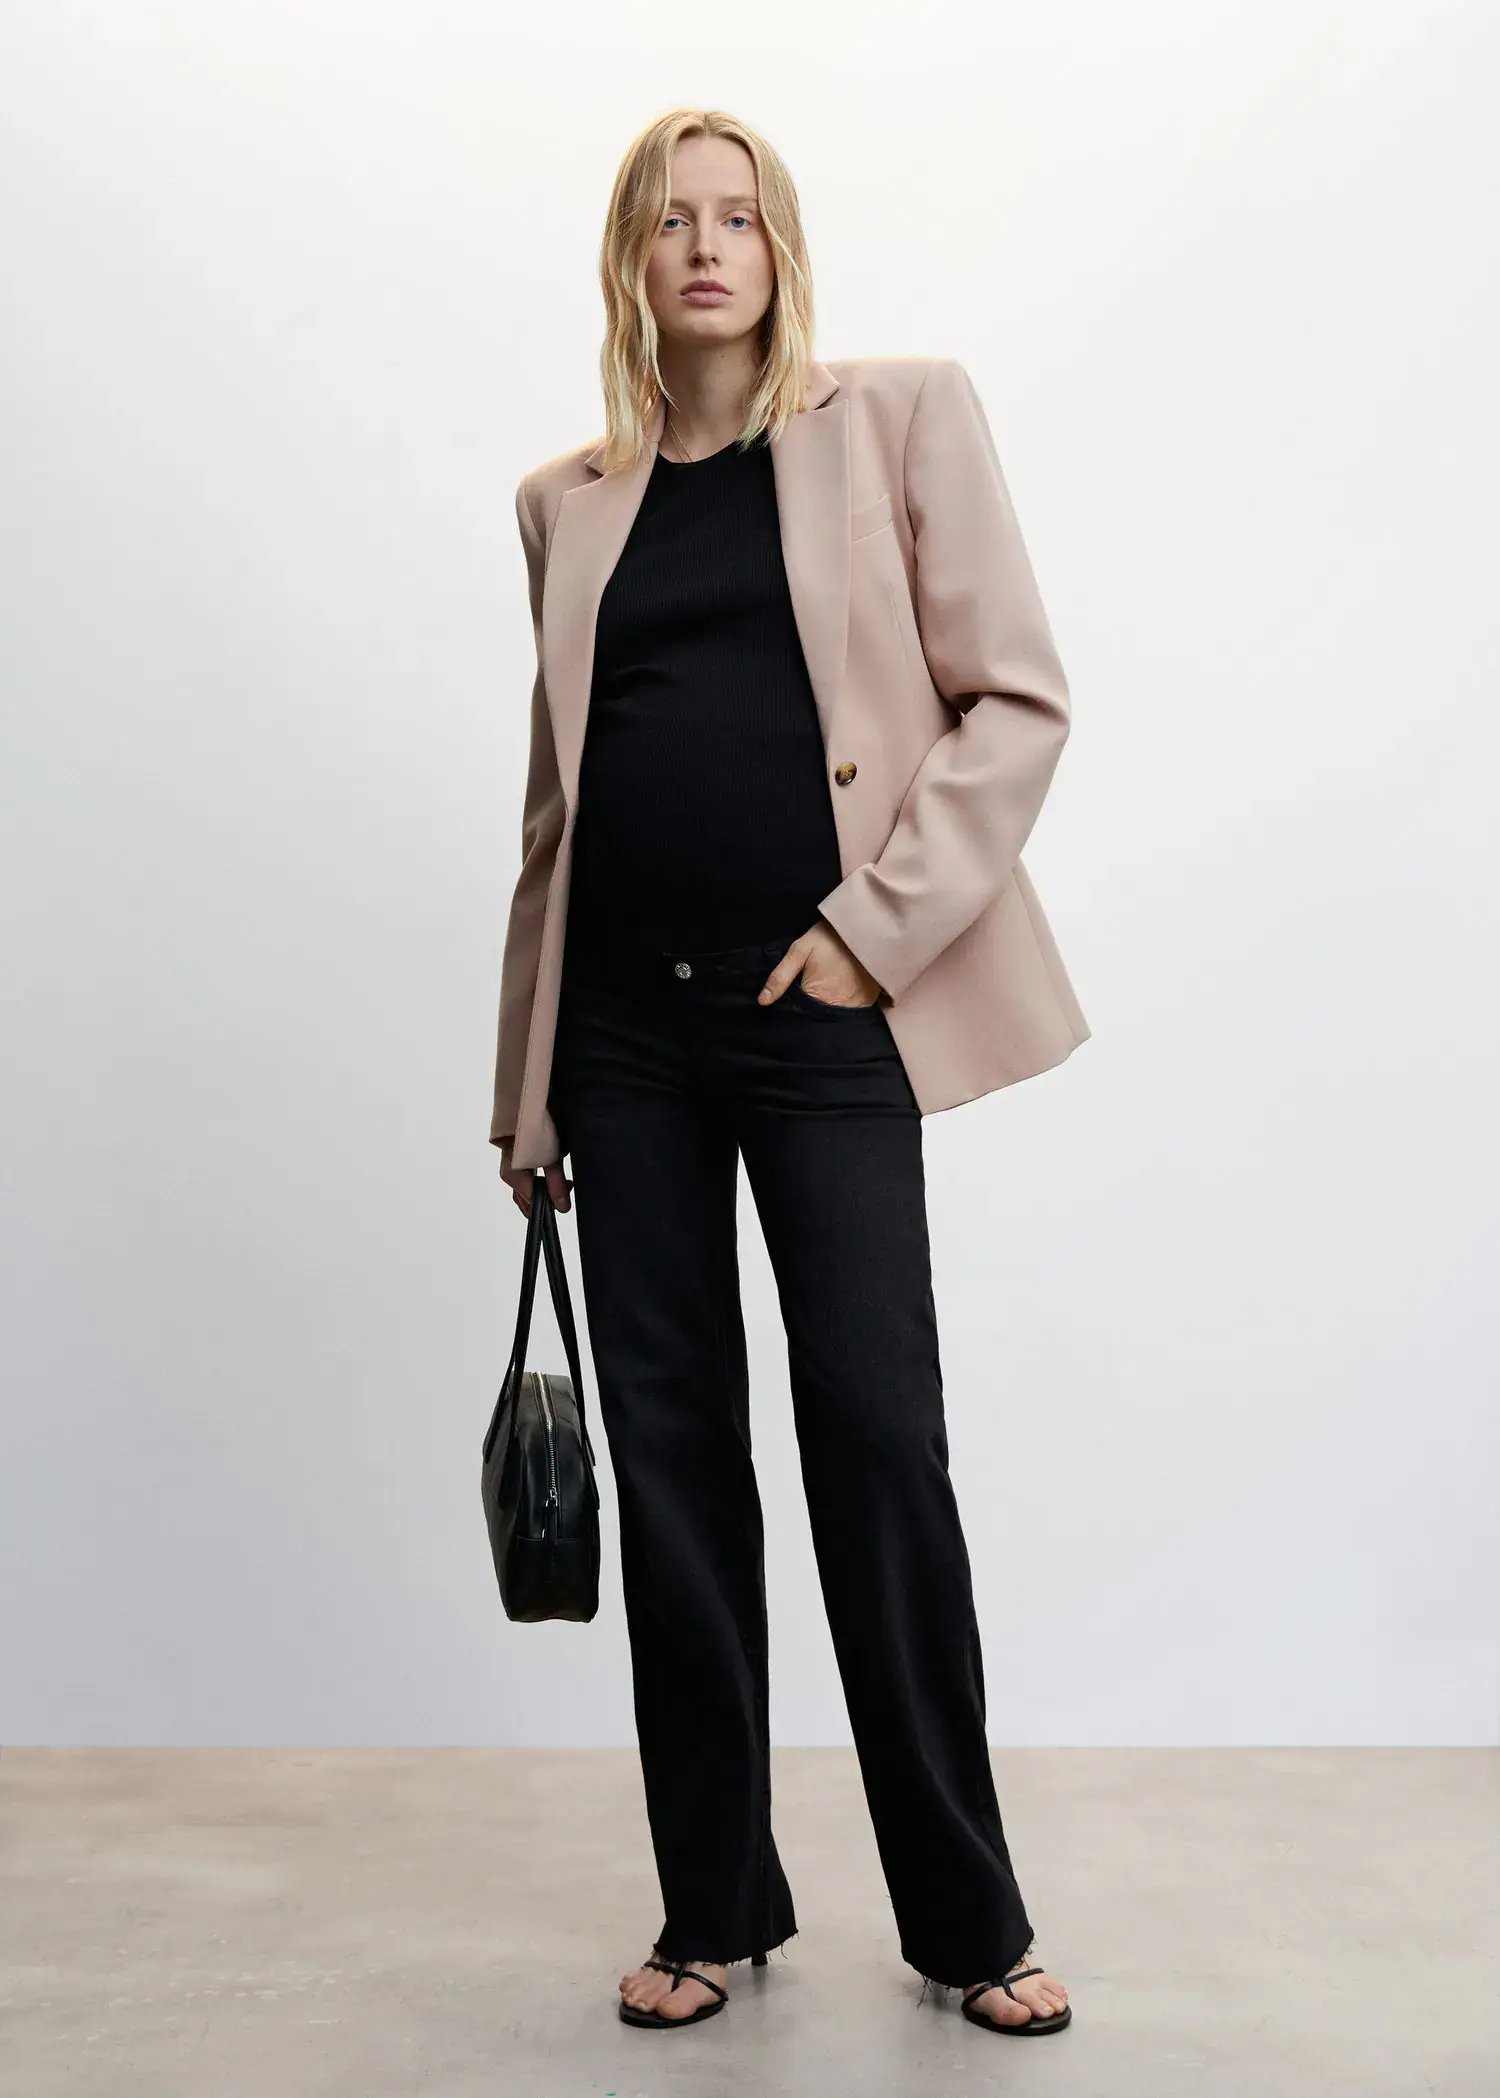 Mango Maternity wideleg jeans. a woman wearing a suit and holding a purse. 